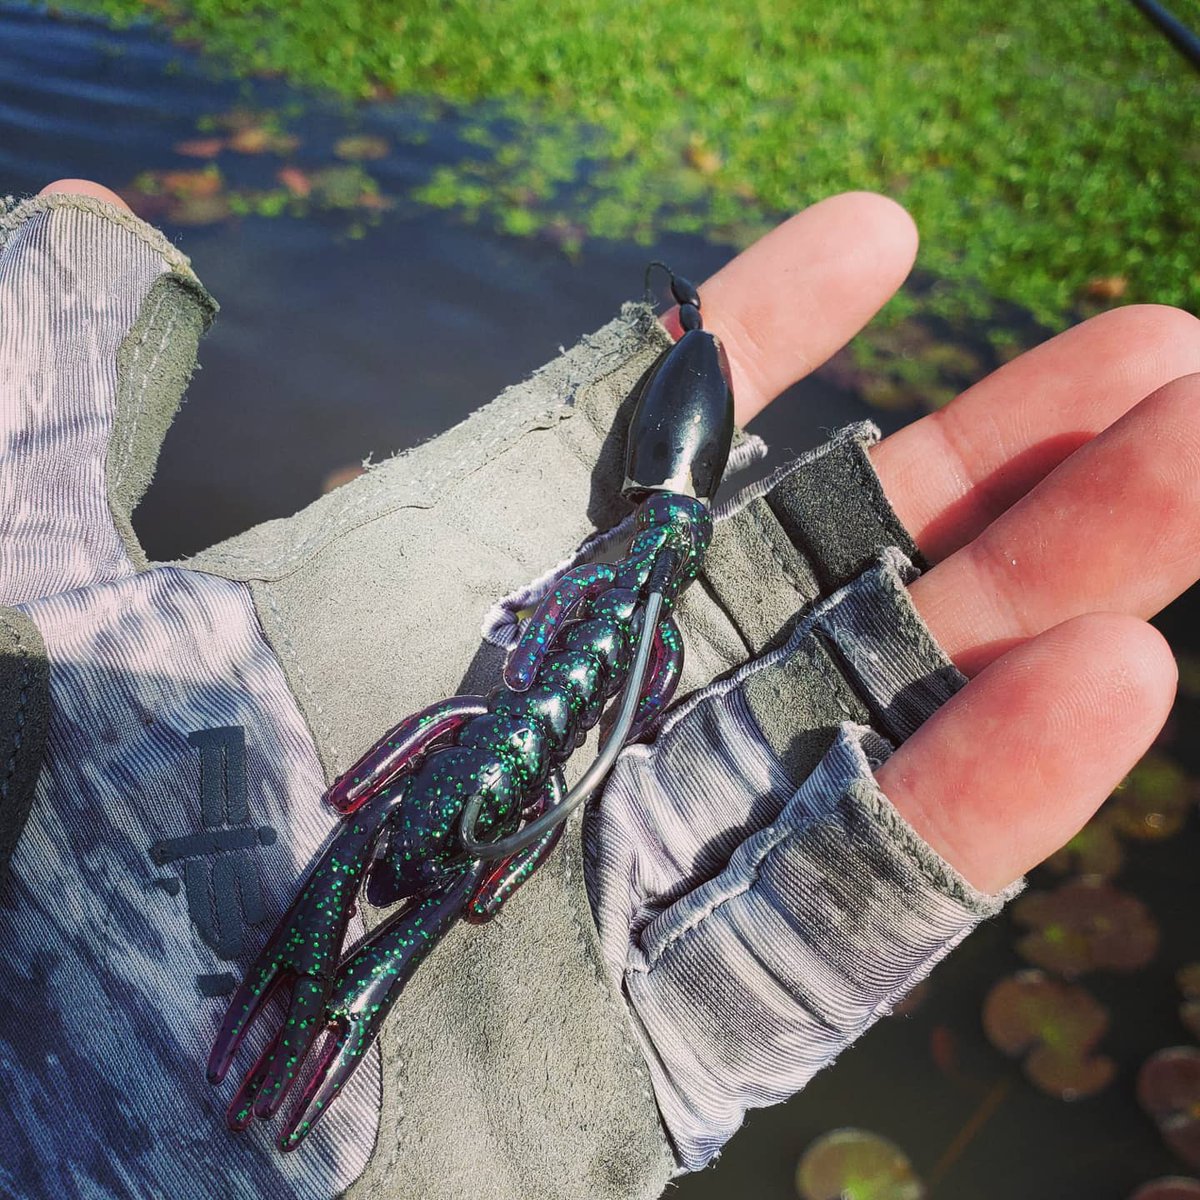 Gambler Lures on X: The grass is grown and it's time to get out the heavy  weight and punch on thru the roof with a BB Cricket! #bbcricket #punching  #heavycover #bassfishing  /